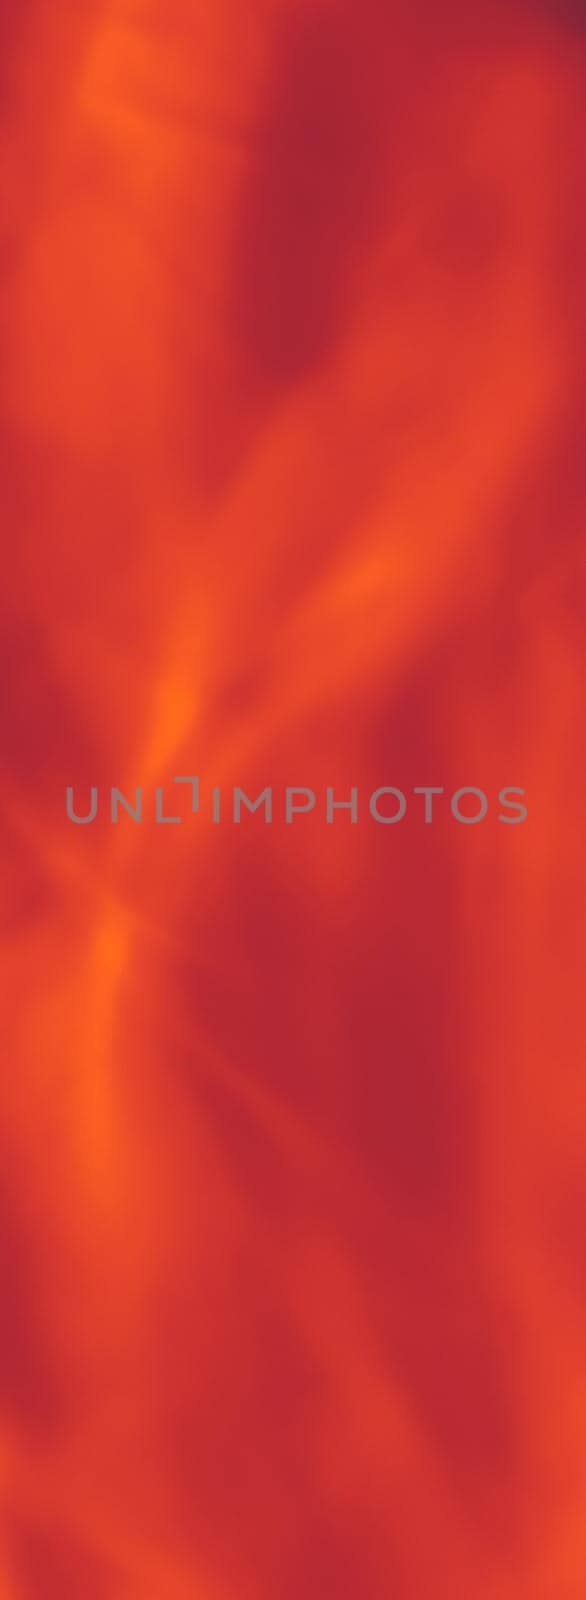 Holiday branding, beauty glamour and cyber backgrounds concept - Orange abstract art background, fire flame texture and wave lines for classic luxury design